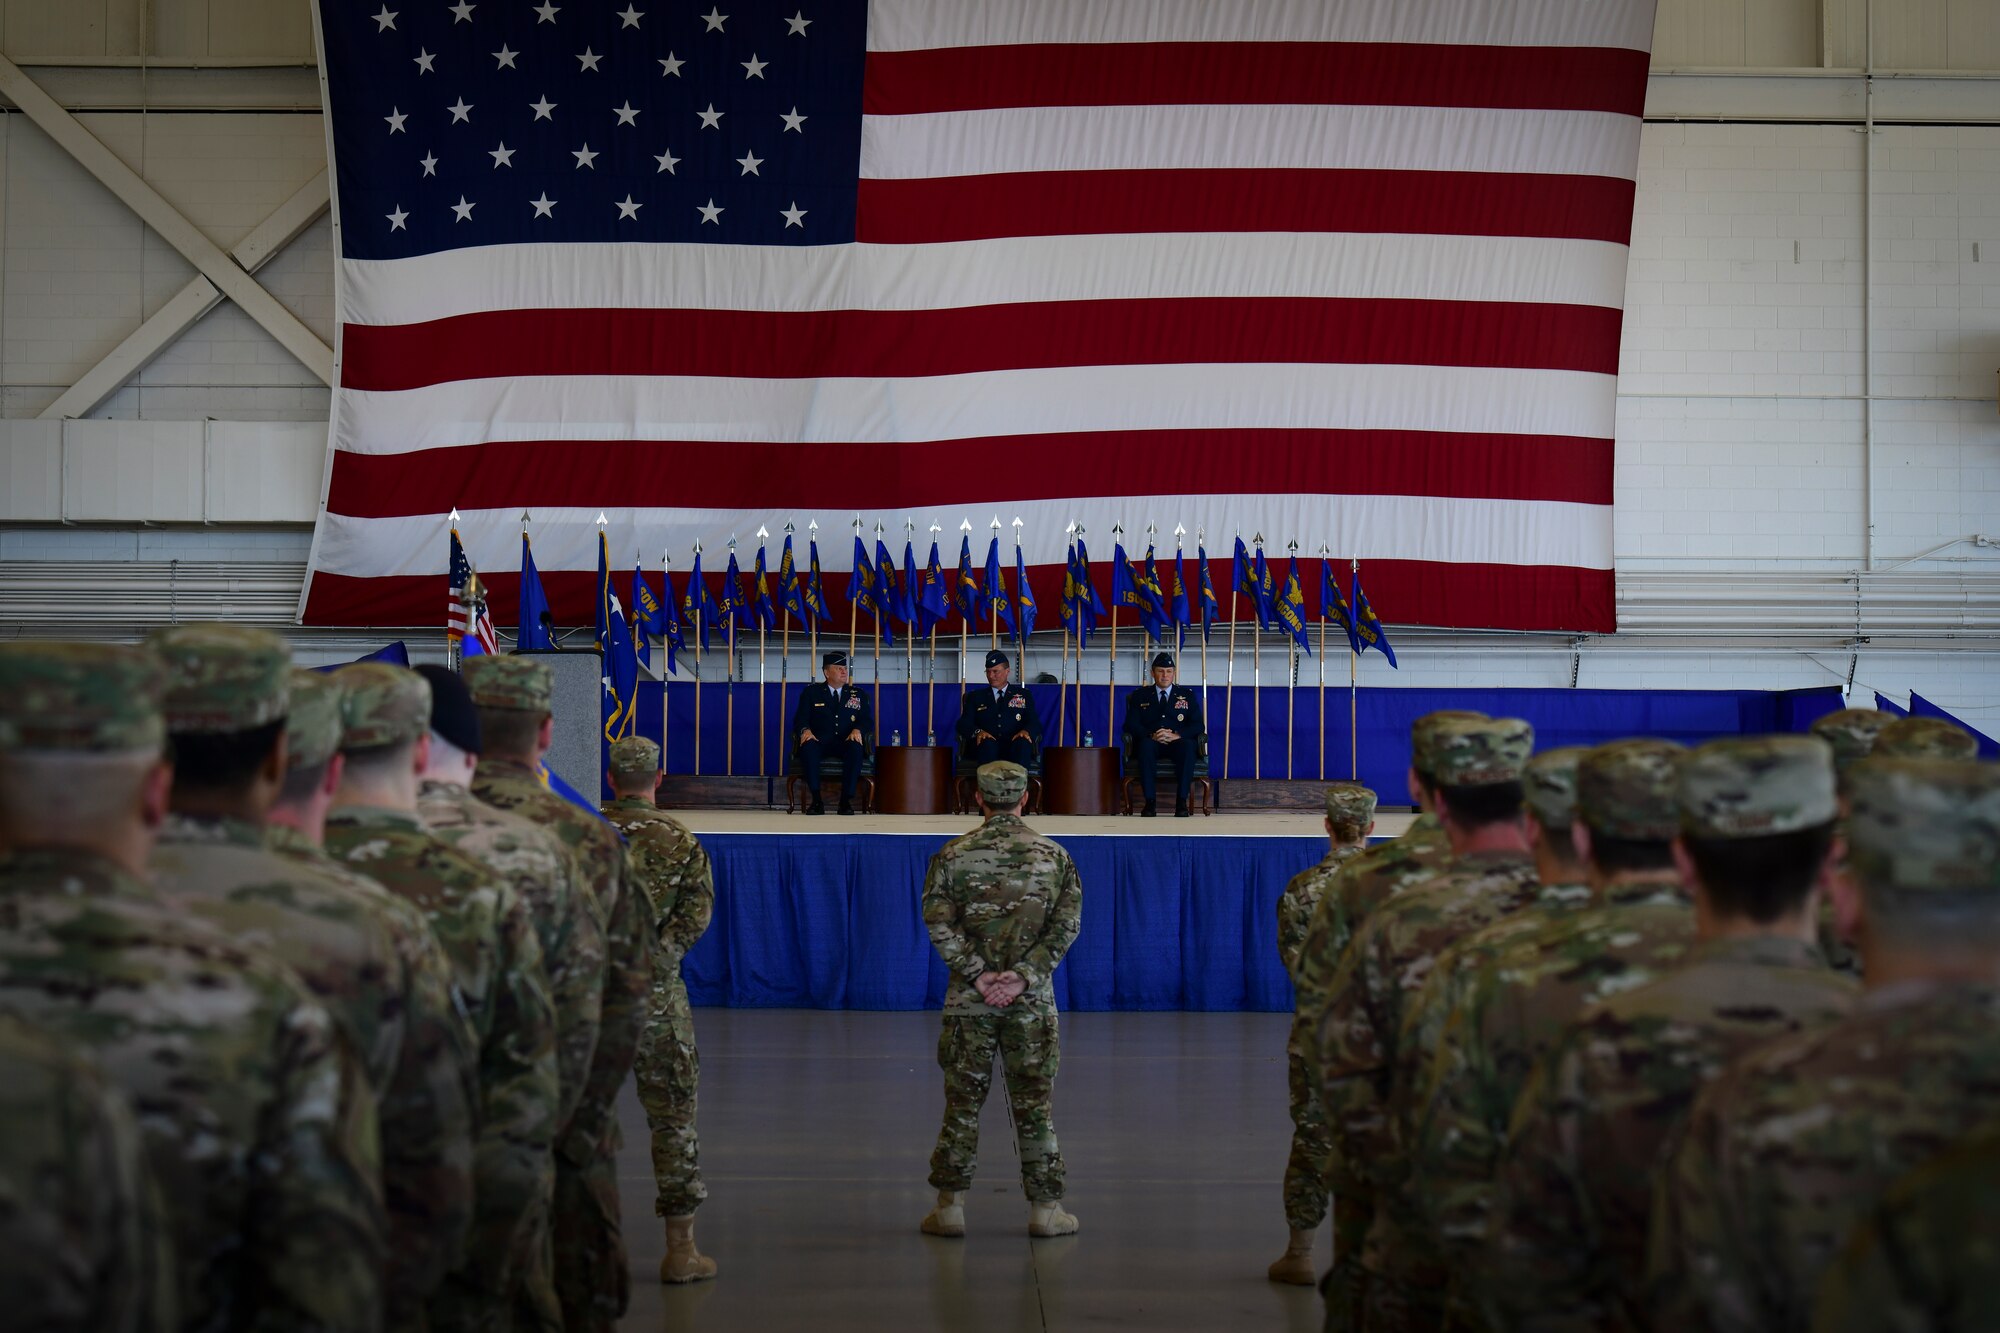 Air Commandos gather for the 1st Special Operations Wing change of command ceremony at Hurlburt Field, Fla., June 22, 2018. U.S. Air Force Col. Tom Palenske, outgoing commander of the 1st SOW, relinquished command to U.S. Air Force Col. Michael Conley, former vice commander of the 27th Special Operations Wing, Cannon Air Force Base, New Mexico, after leading the wing for approximately three years as both the vice and wing commander.